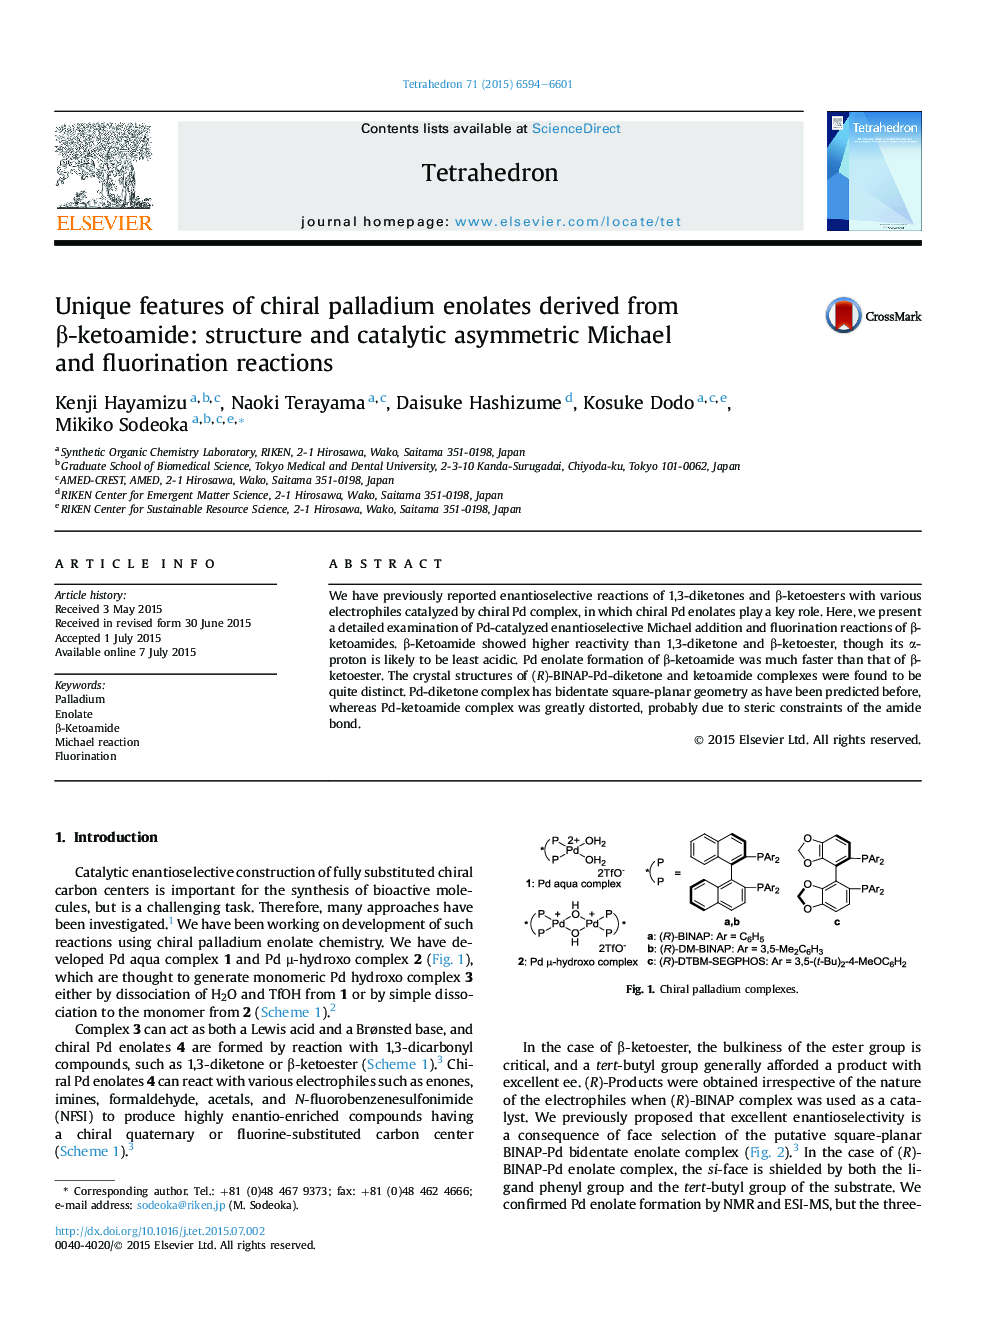 Unique features of chiral palladium enolates derived from Î²-ketoamide: structure and catalytic asymmetric Michael andÂ fluorination reactions